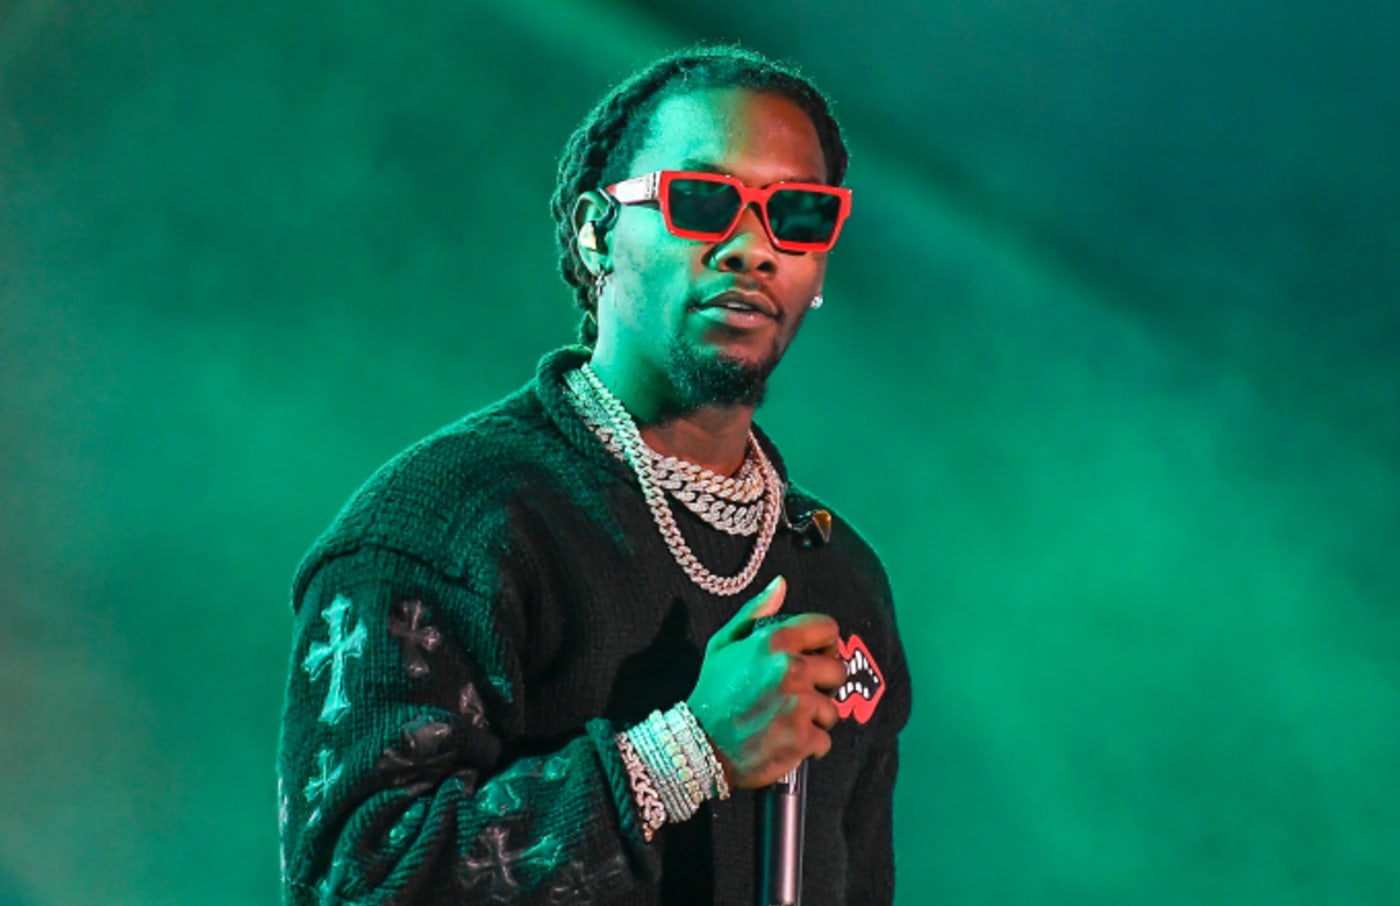 Rapper Offset of Migos performs at the 2019 Rolling Loud Music Festival